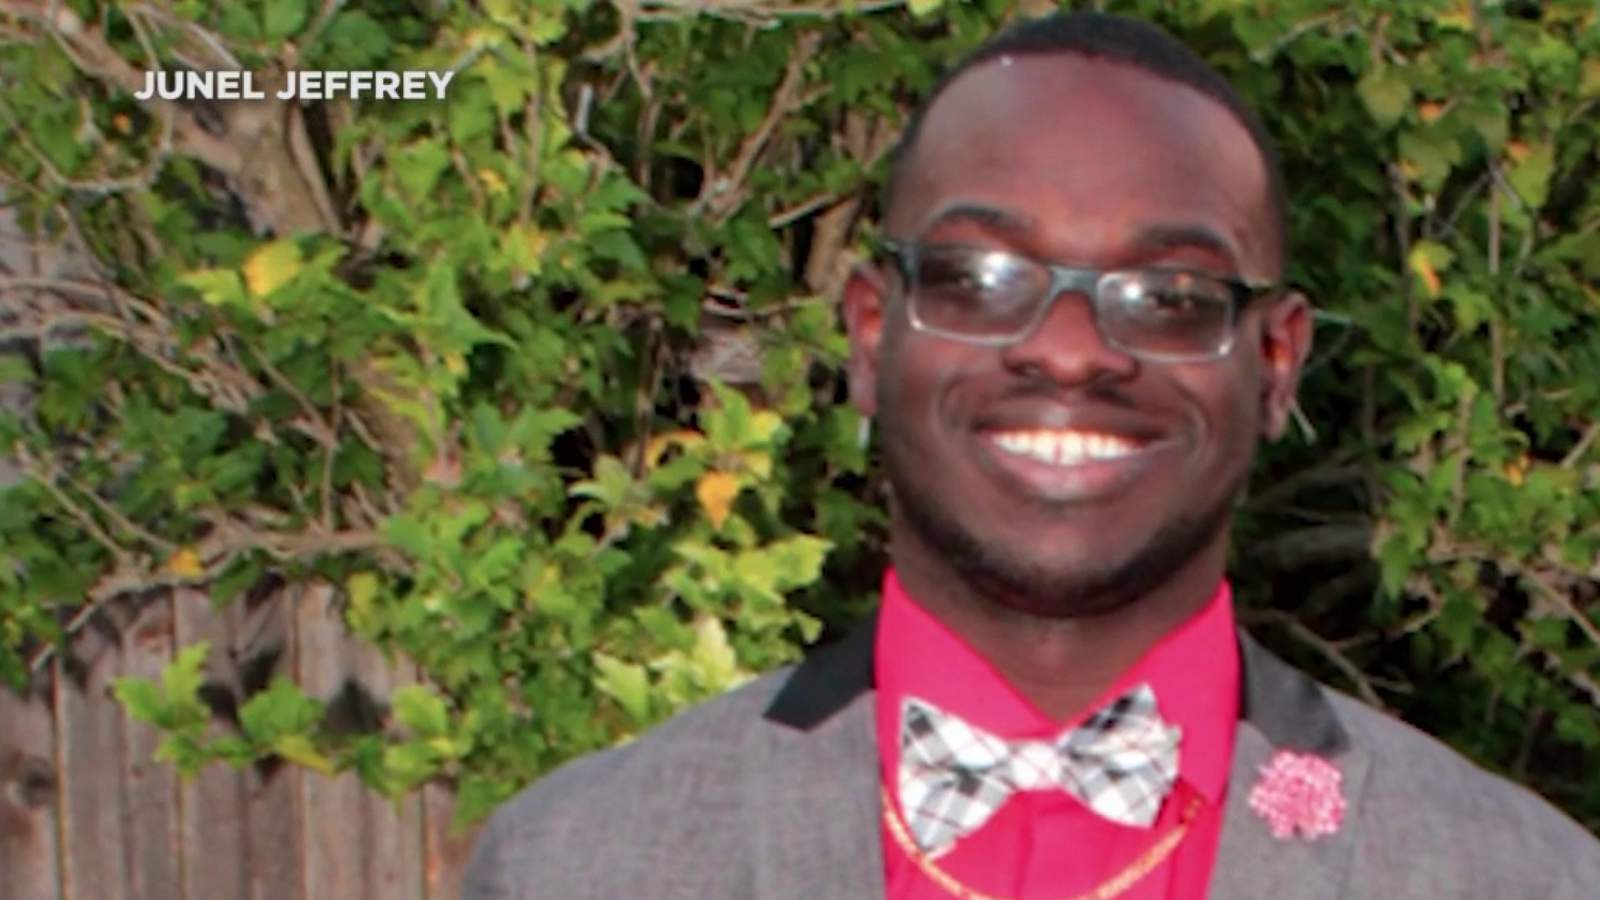 ‘He will always be our baby,’: Family is seeking justice for 21-year-old after fatal shooting